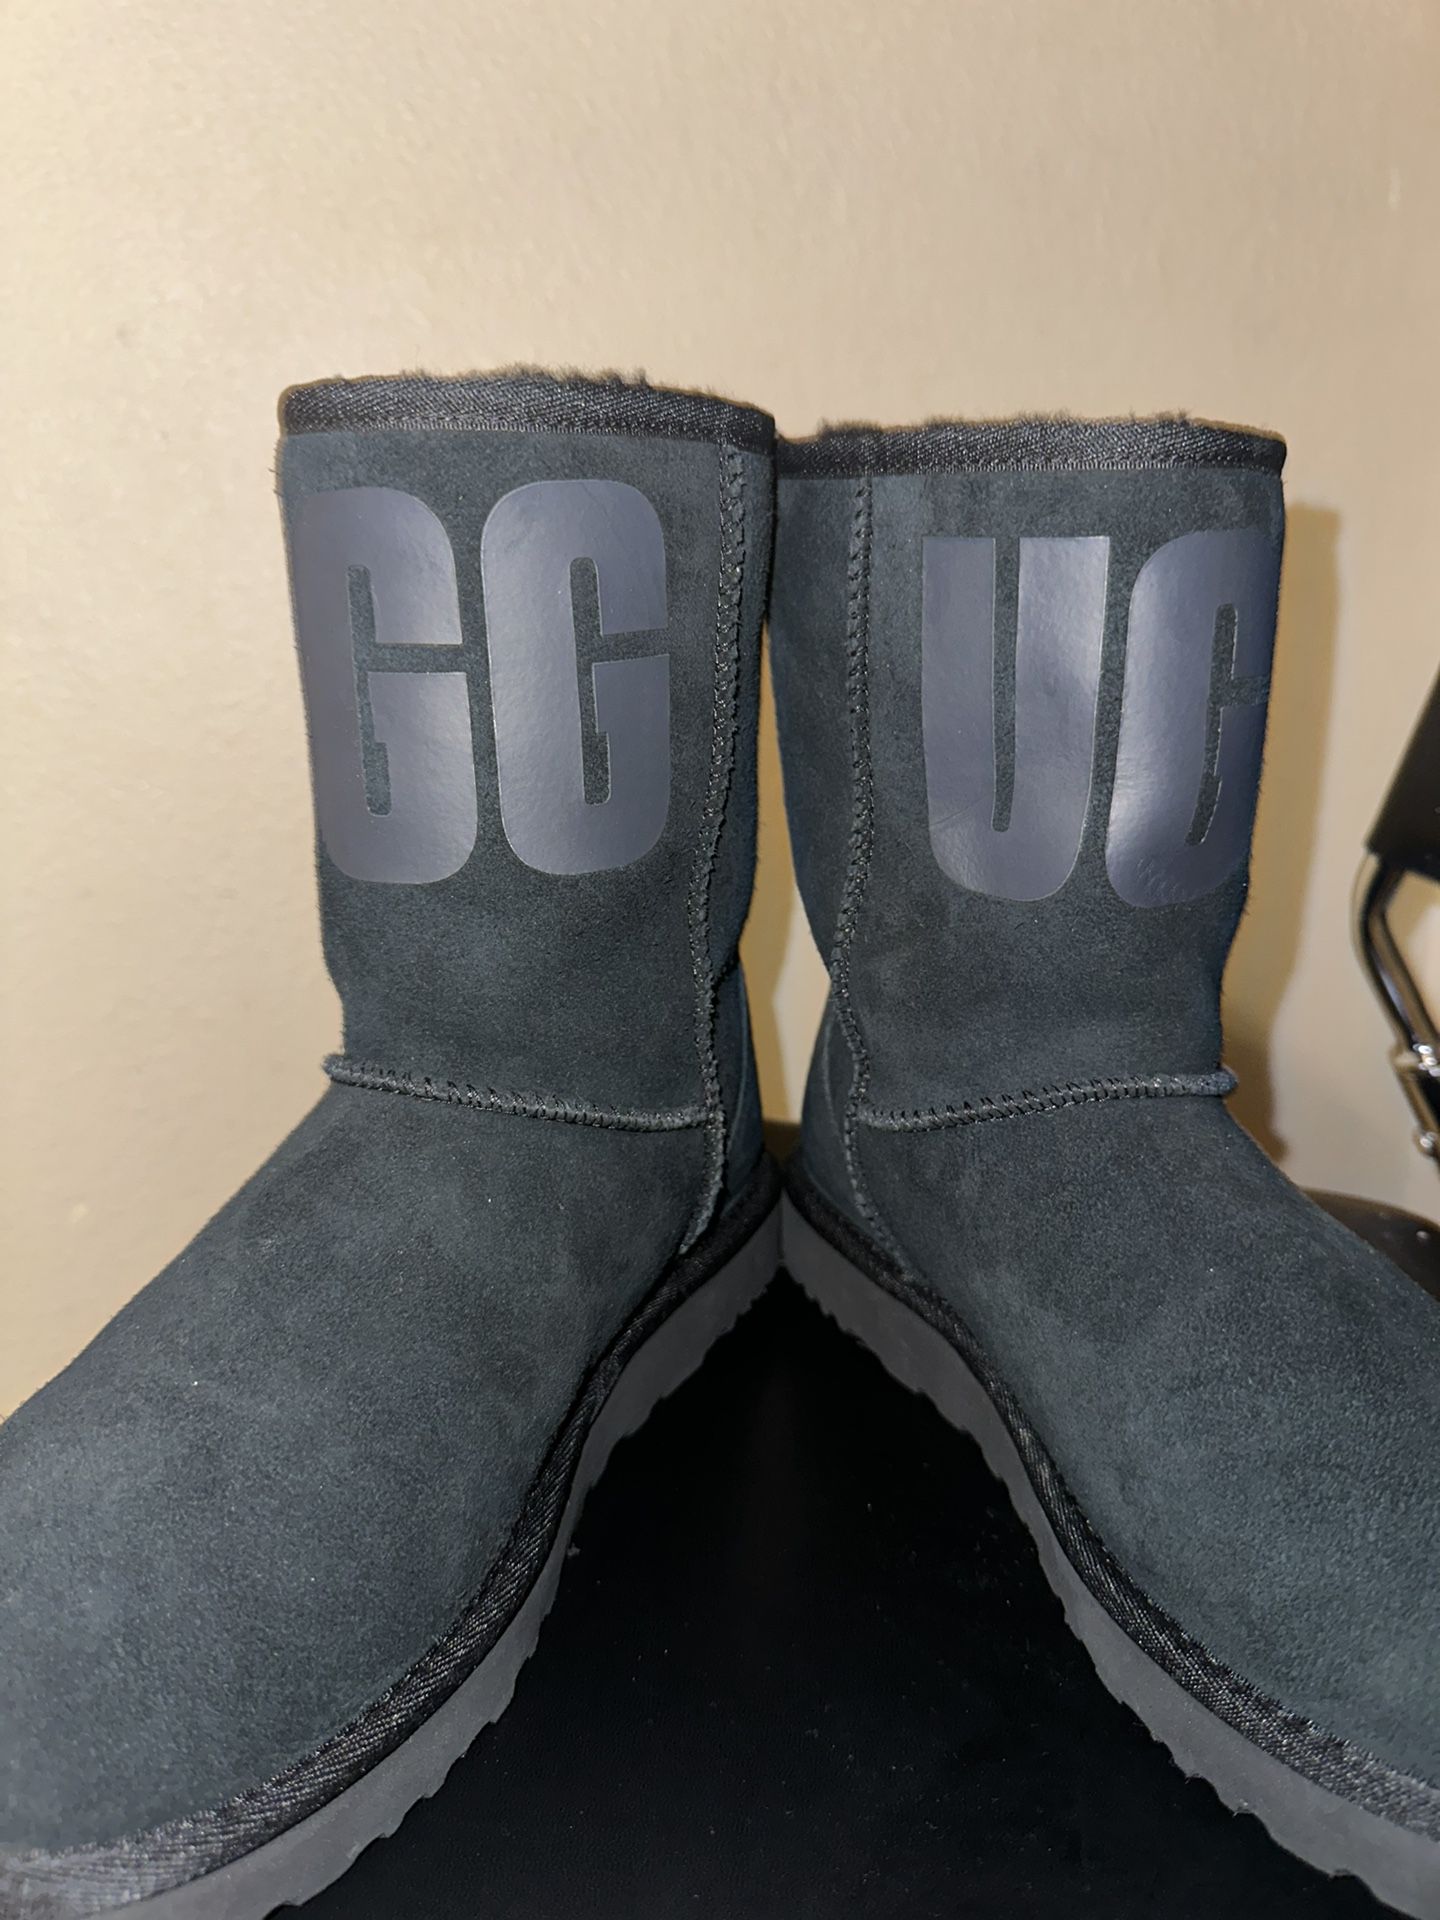 Ugg Boots Size 7 Women